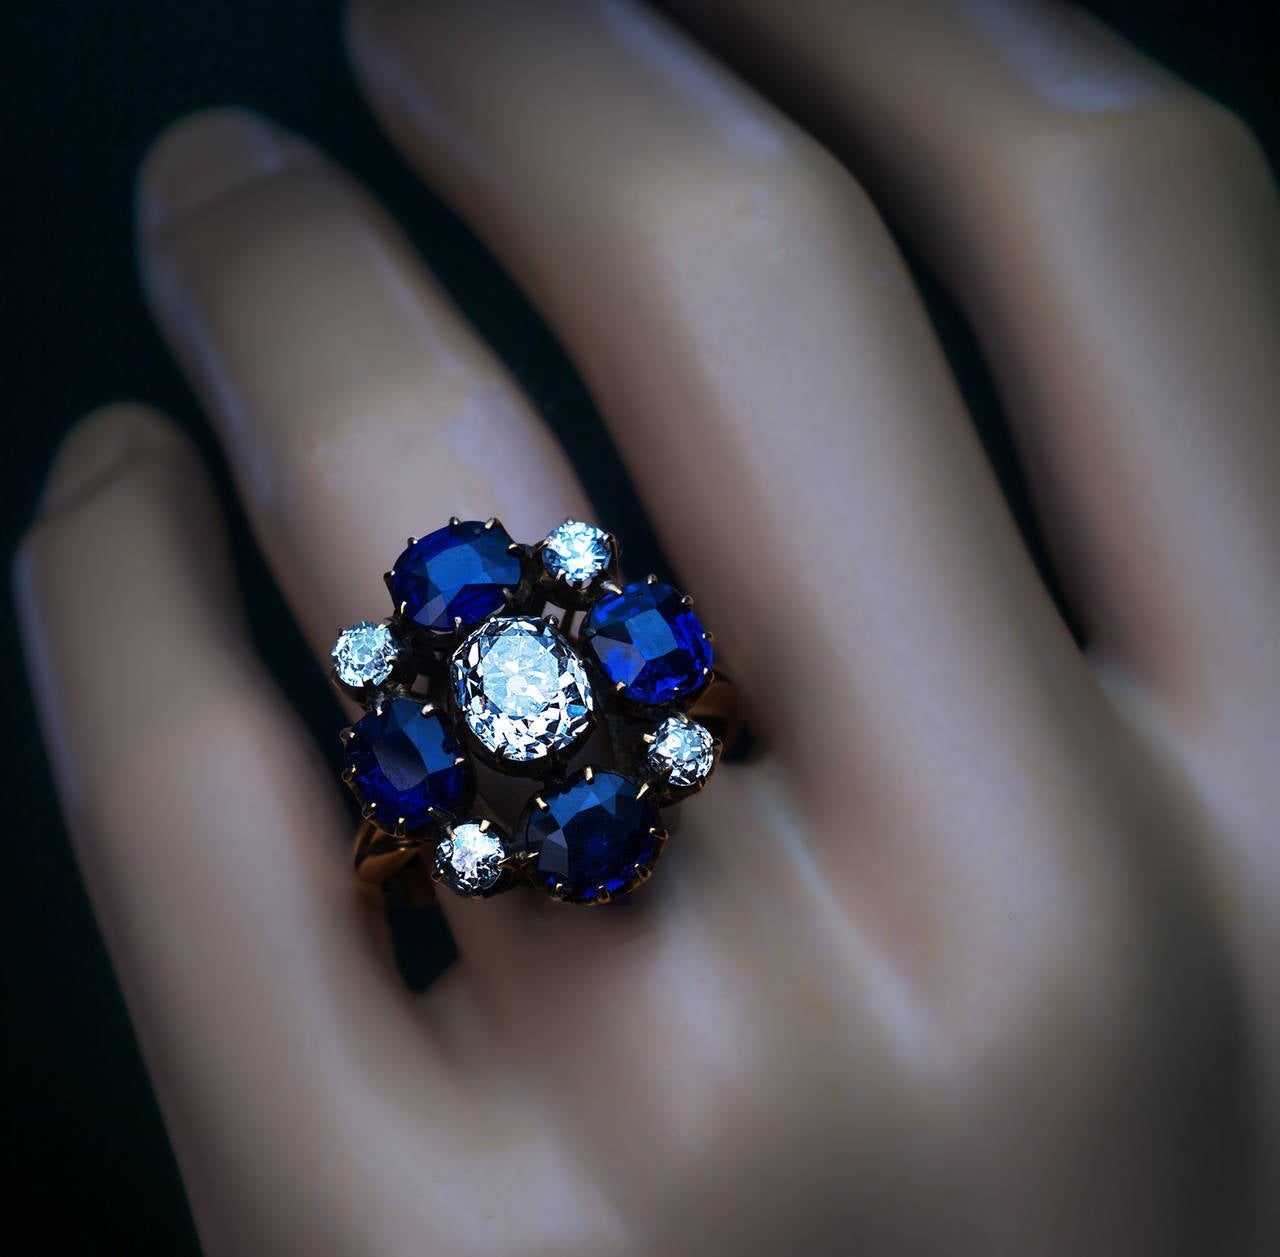 Made between 1908 and 1917.
The 14K gold ring is designed as a stylized flowerhead (20 x 19 mm), centered with an antique cushion cut diamond (7 x 6.2 x 4.8 mm, approximately 1.76 ct, I color, SI1 clarity) surrounded by four cushion cut deep blue